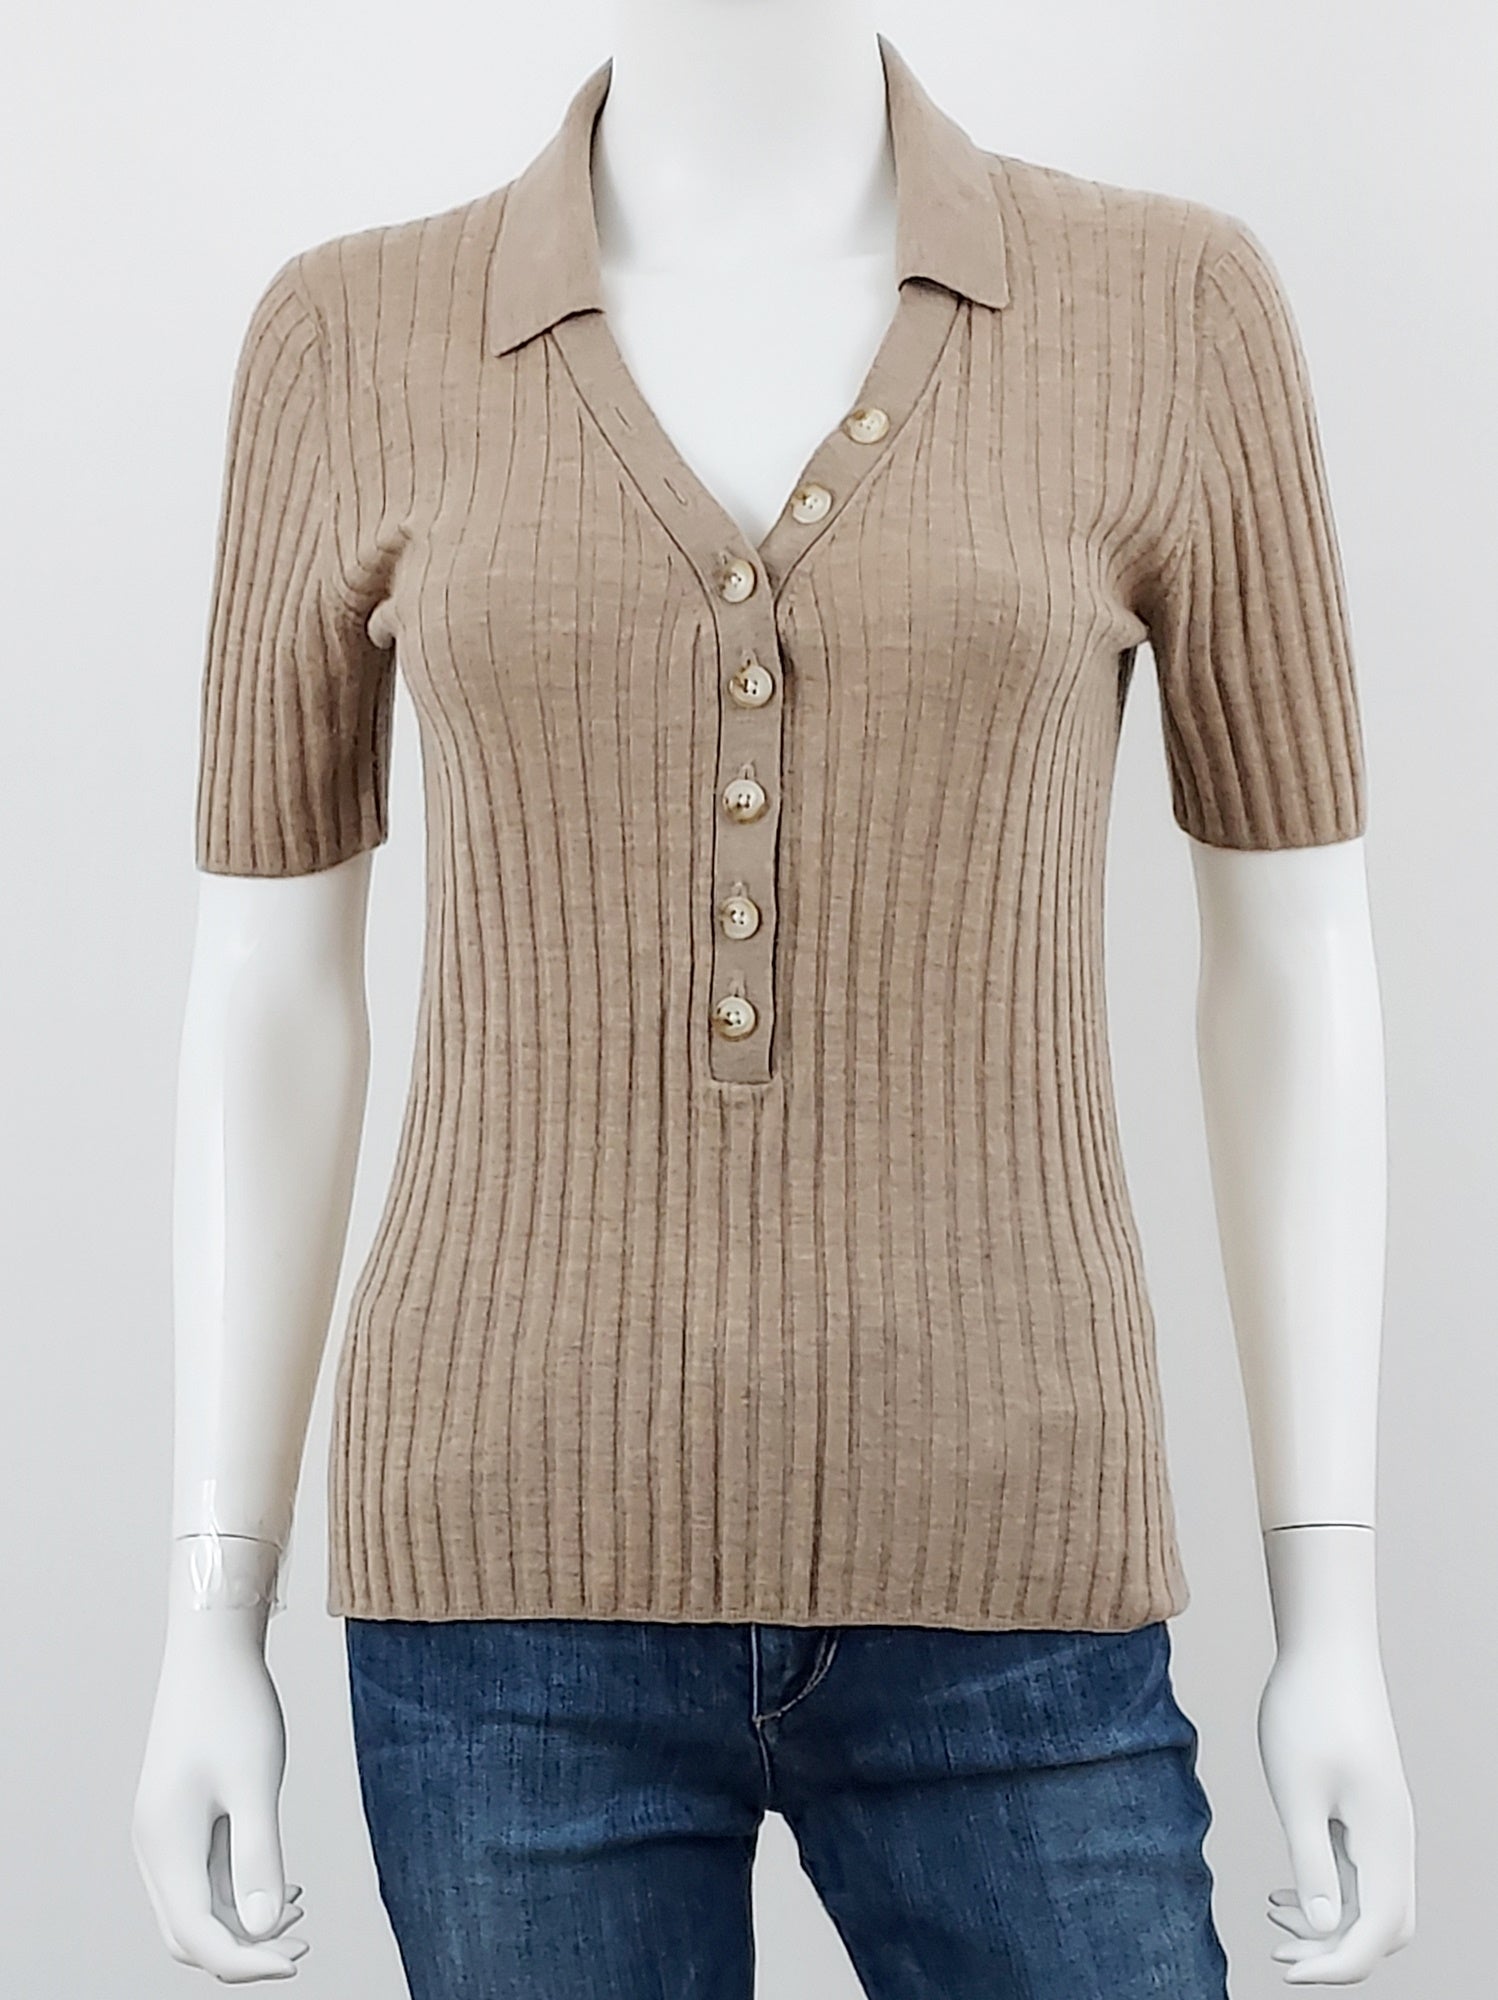 Socotra Polo Top Size XS